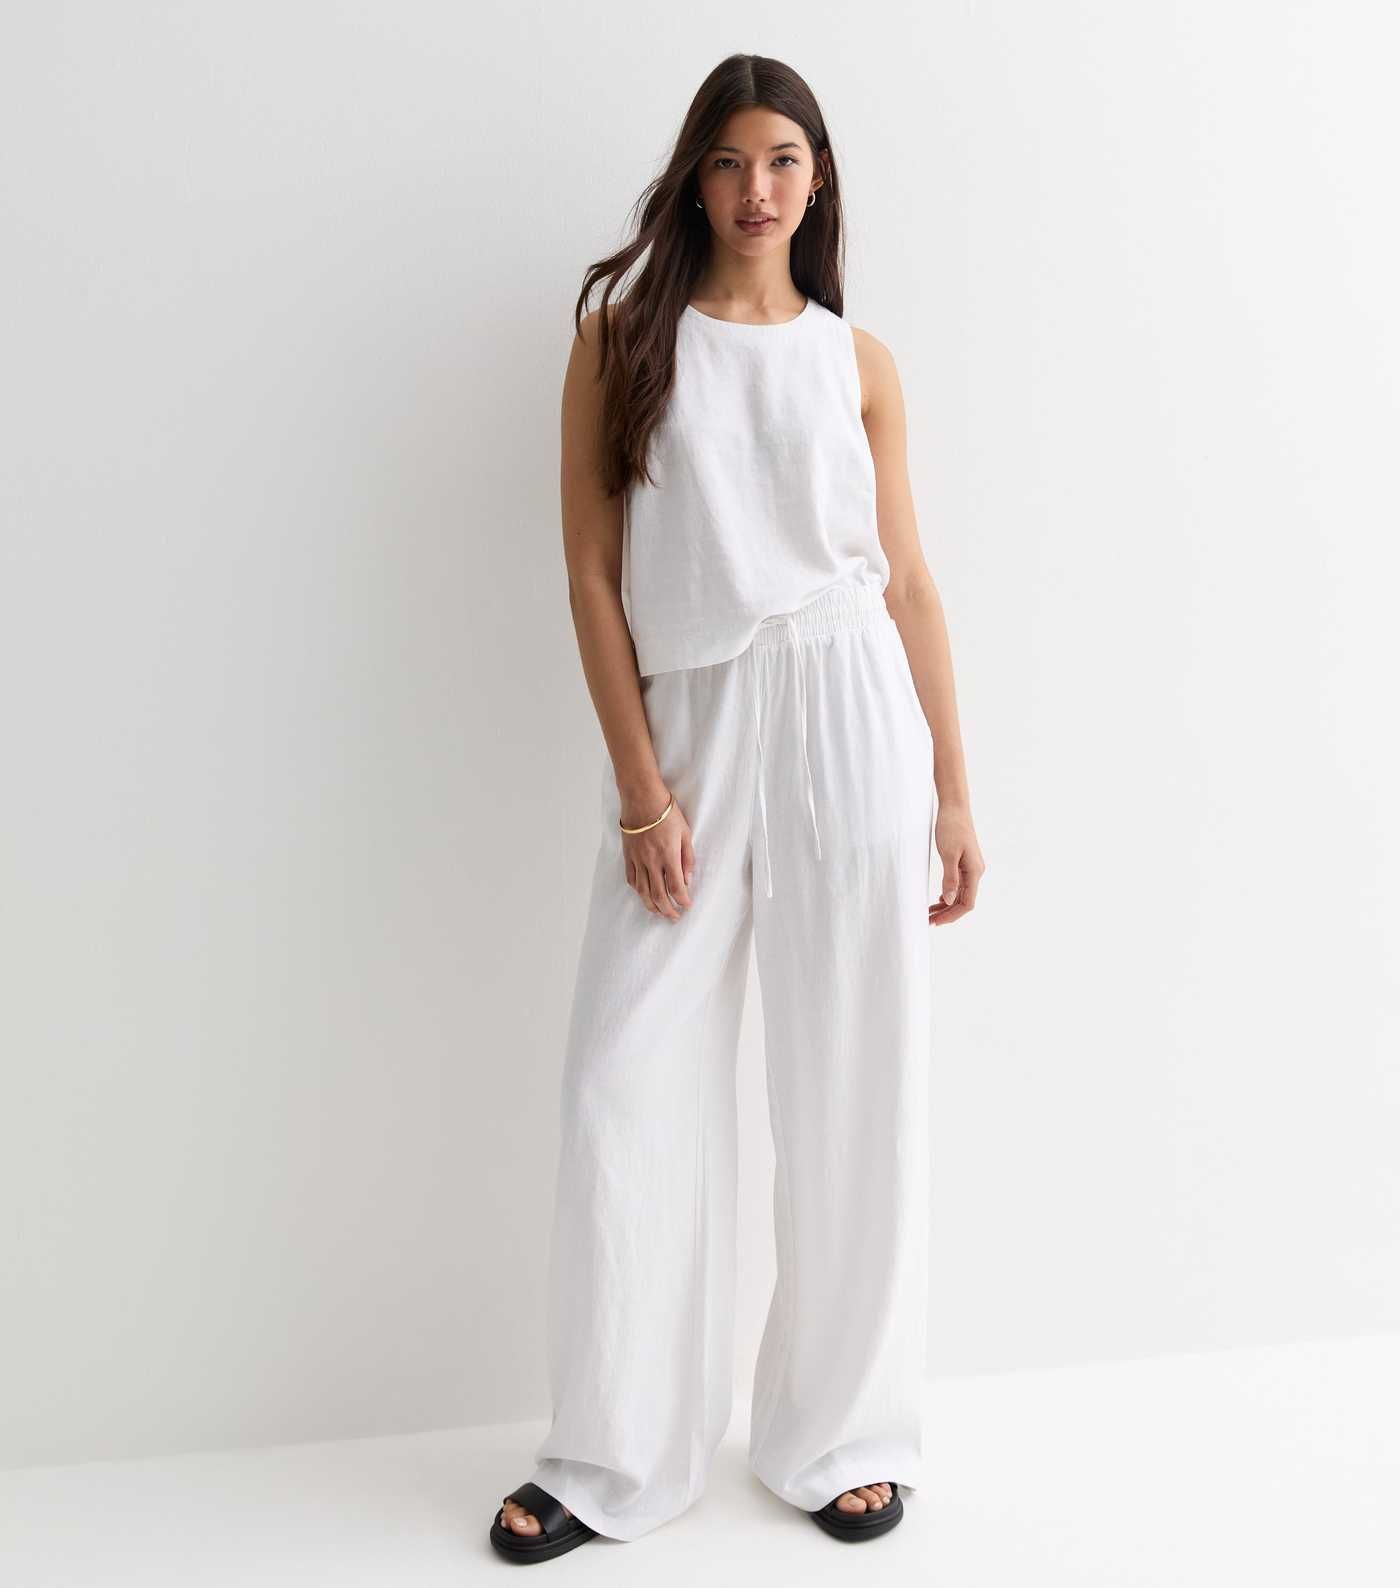 White Linen Blend Drawstring Waist Wide Leg Trousers
						
						Add to Saved Items
						Remove... | New Look (UK)